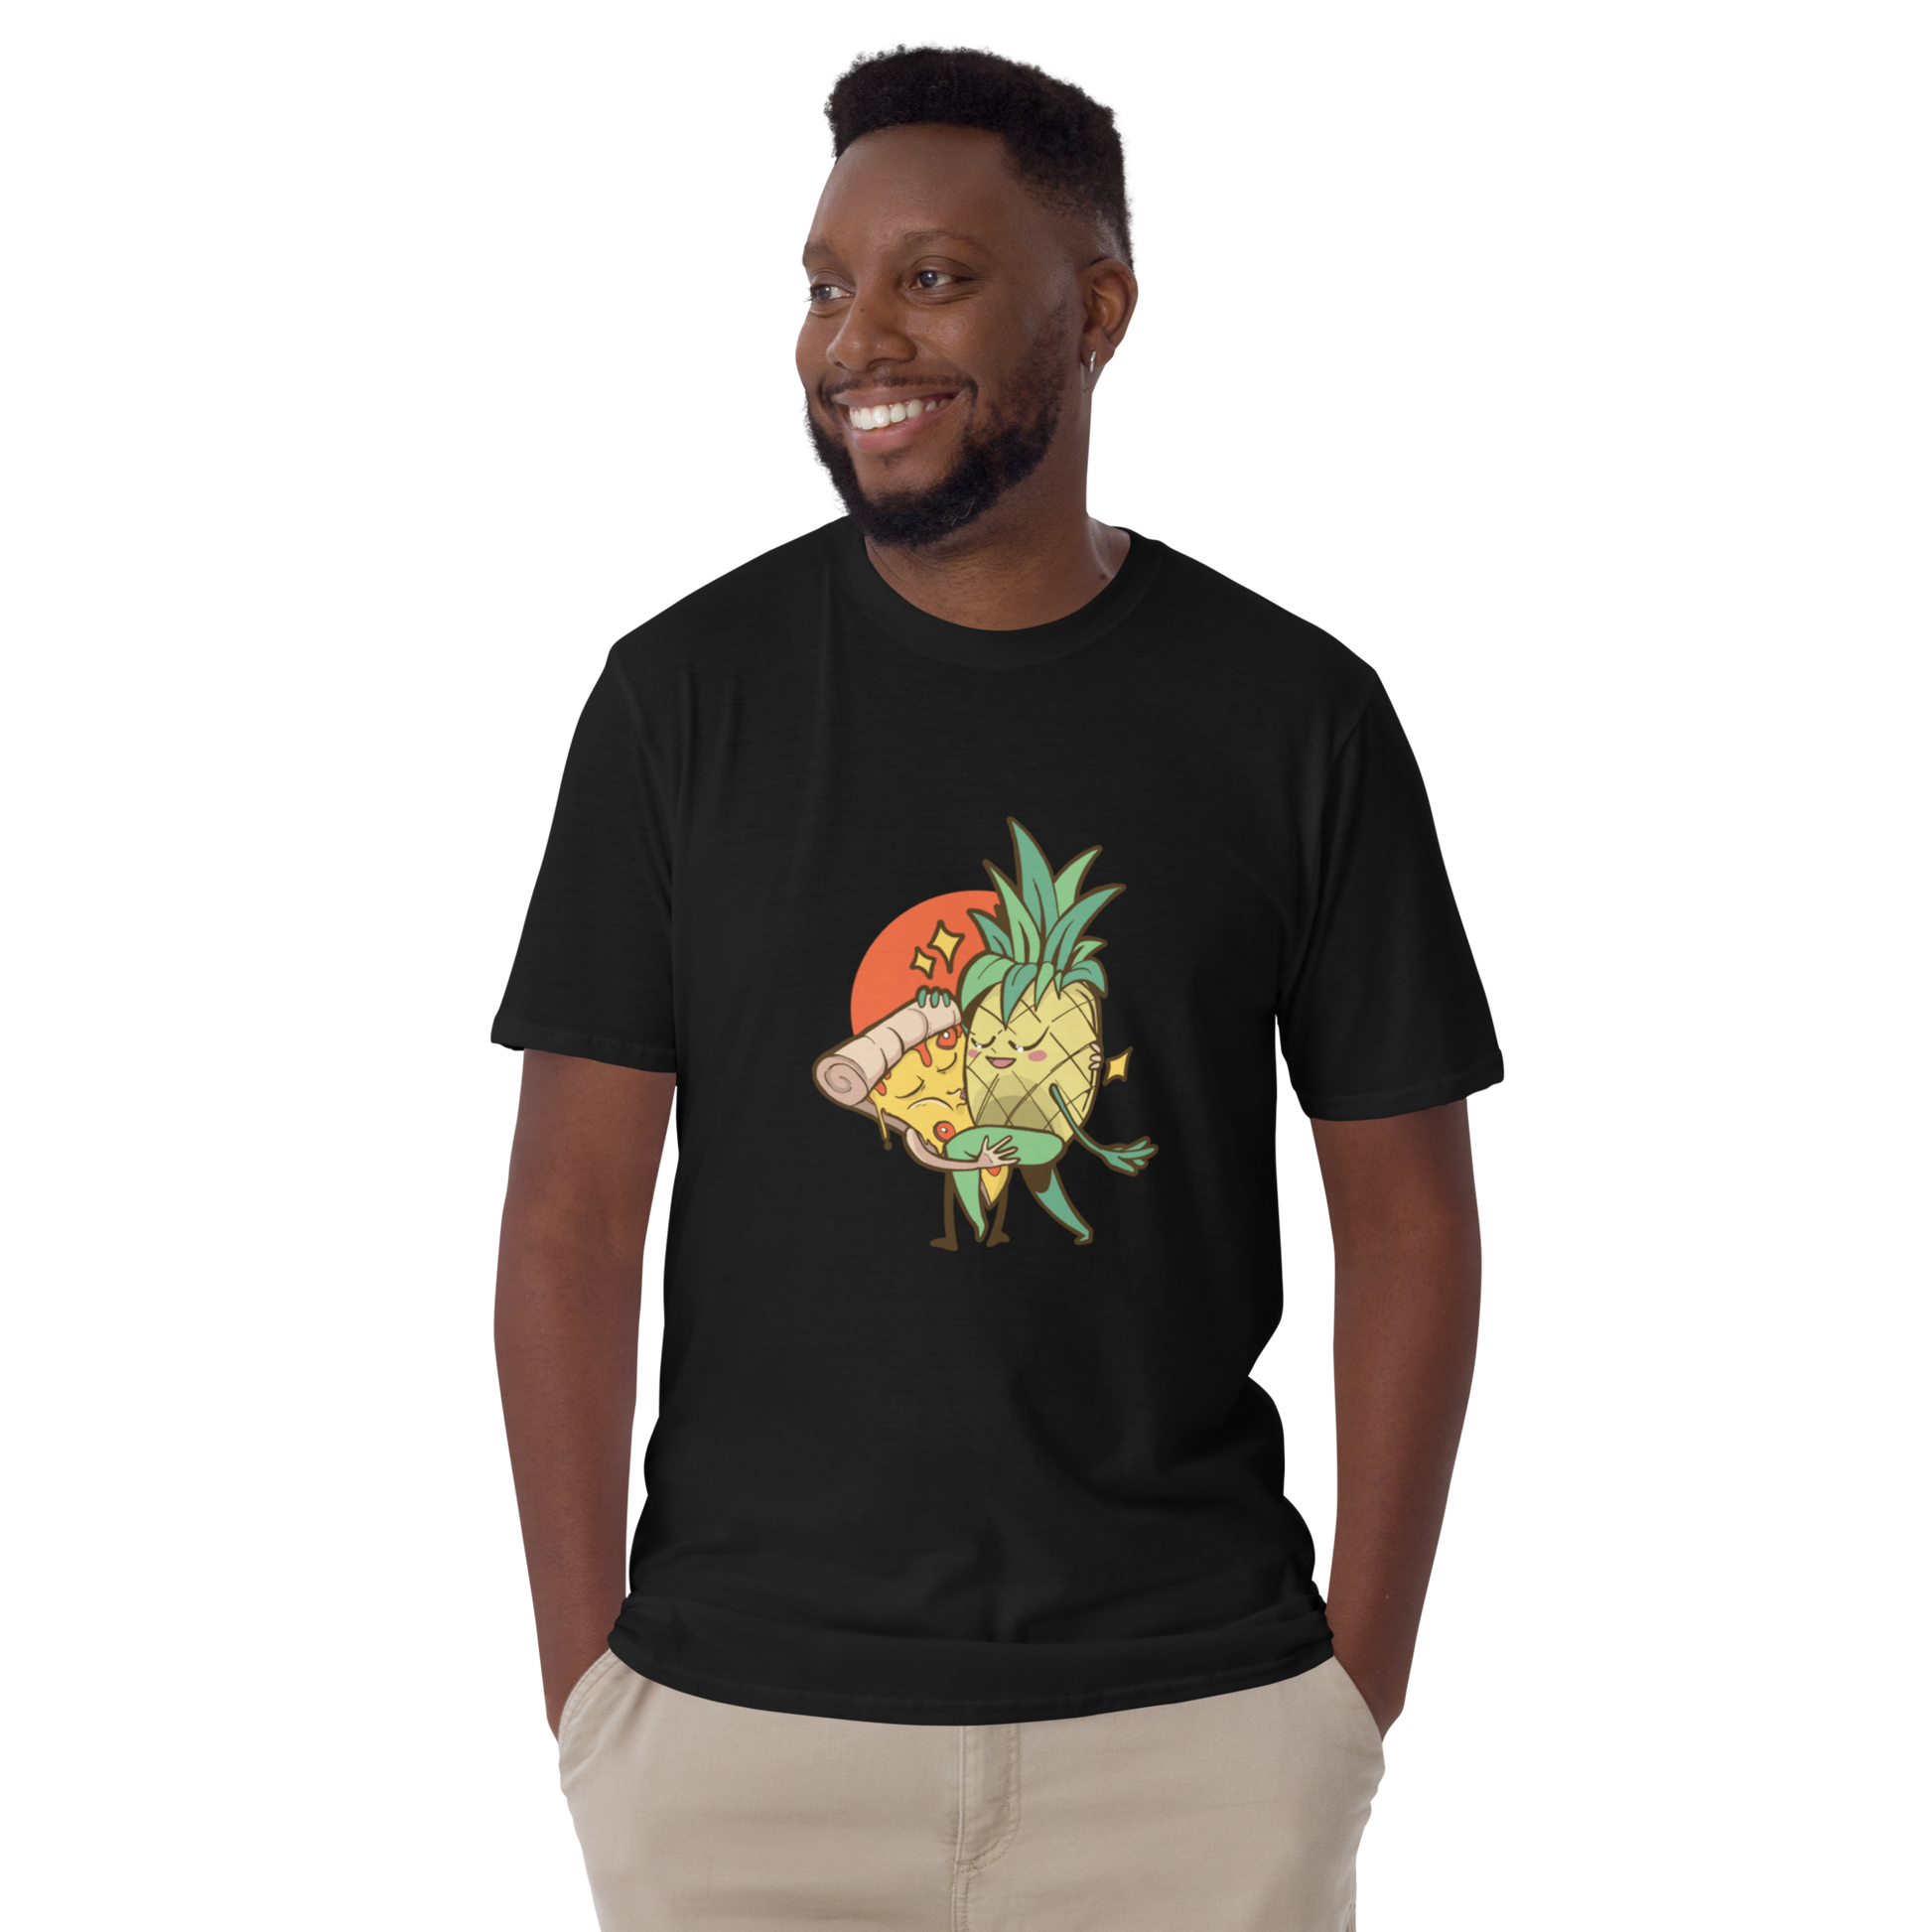 Smiling man wearing a Black Pineapple Pizza T-Shirt featuring the hilarious Pineapple & Pizza graphic on the chest - Funny Graphic Pineapple Pizza T-Shirts - Boozy Fox